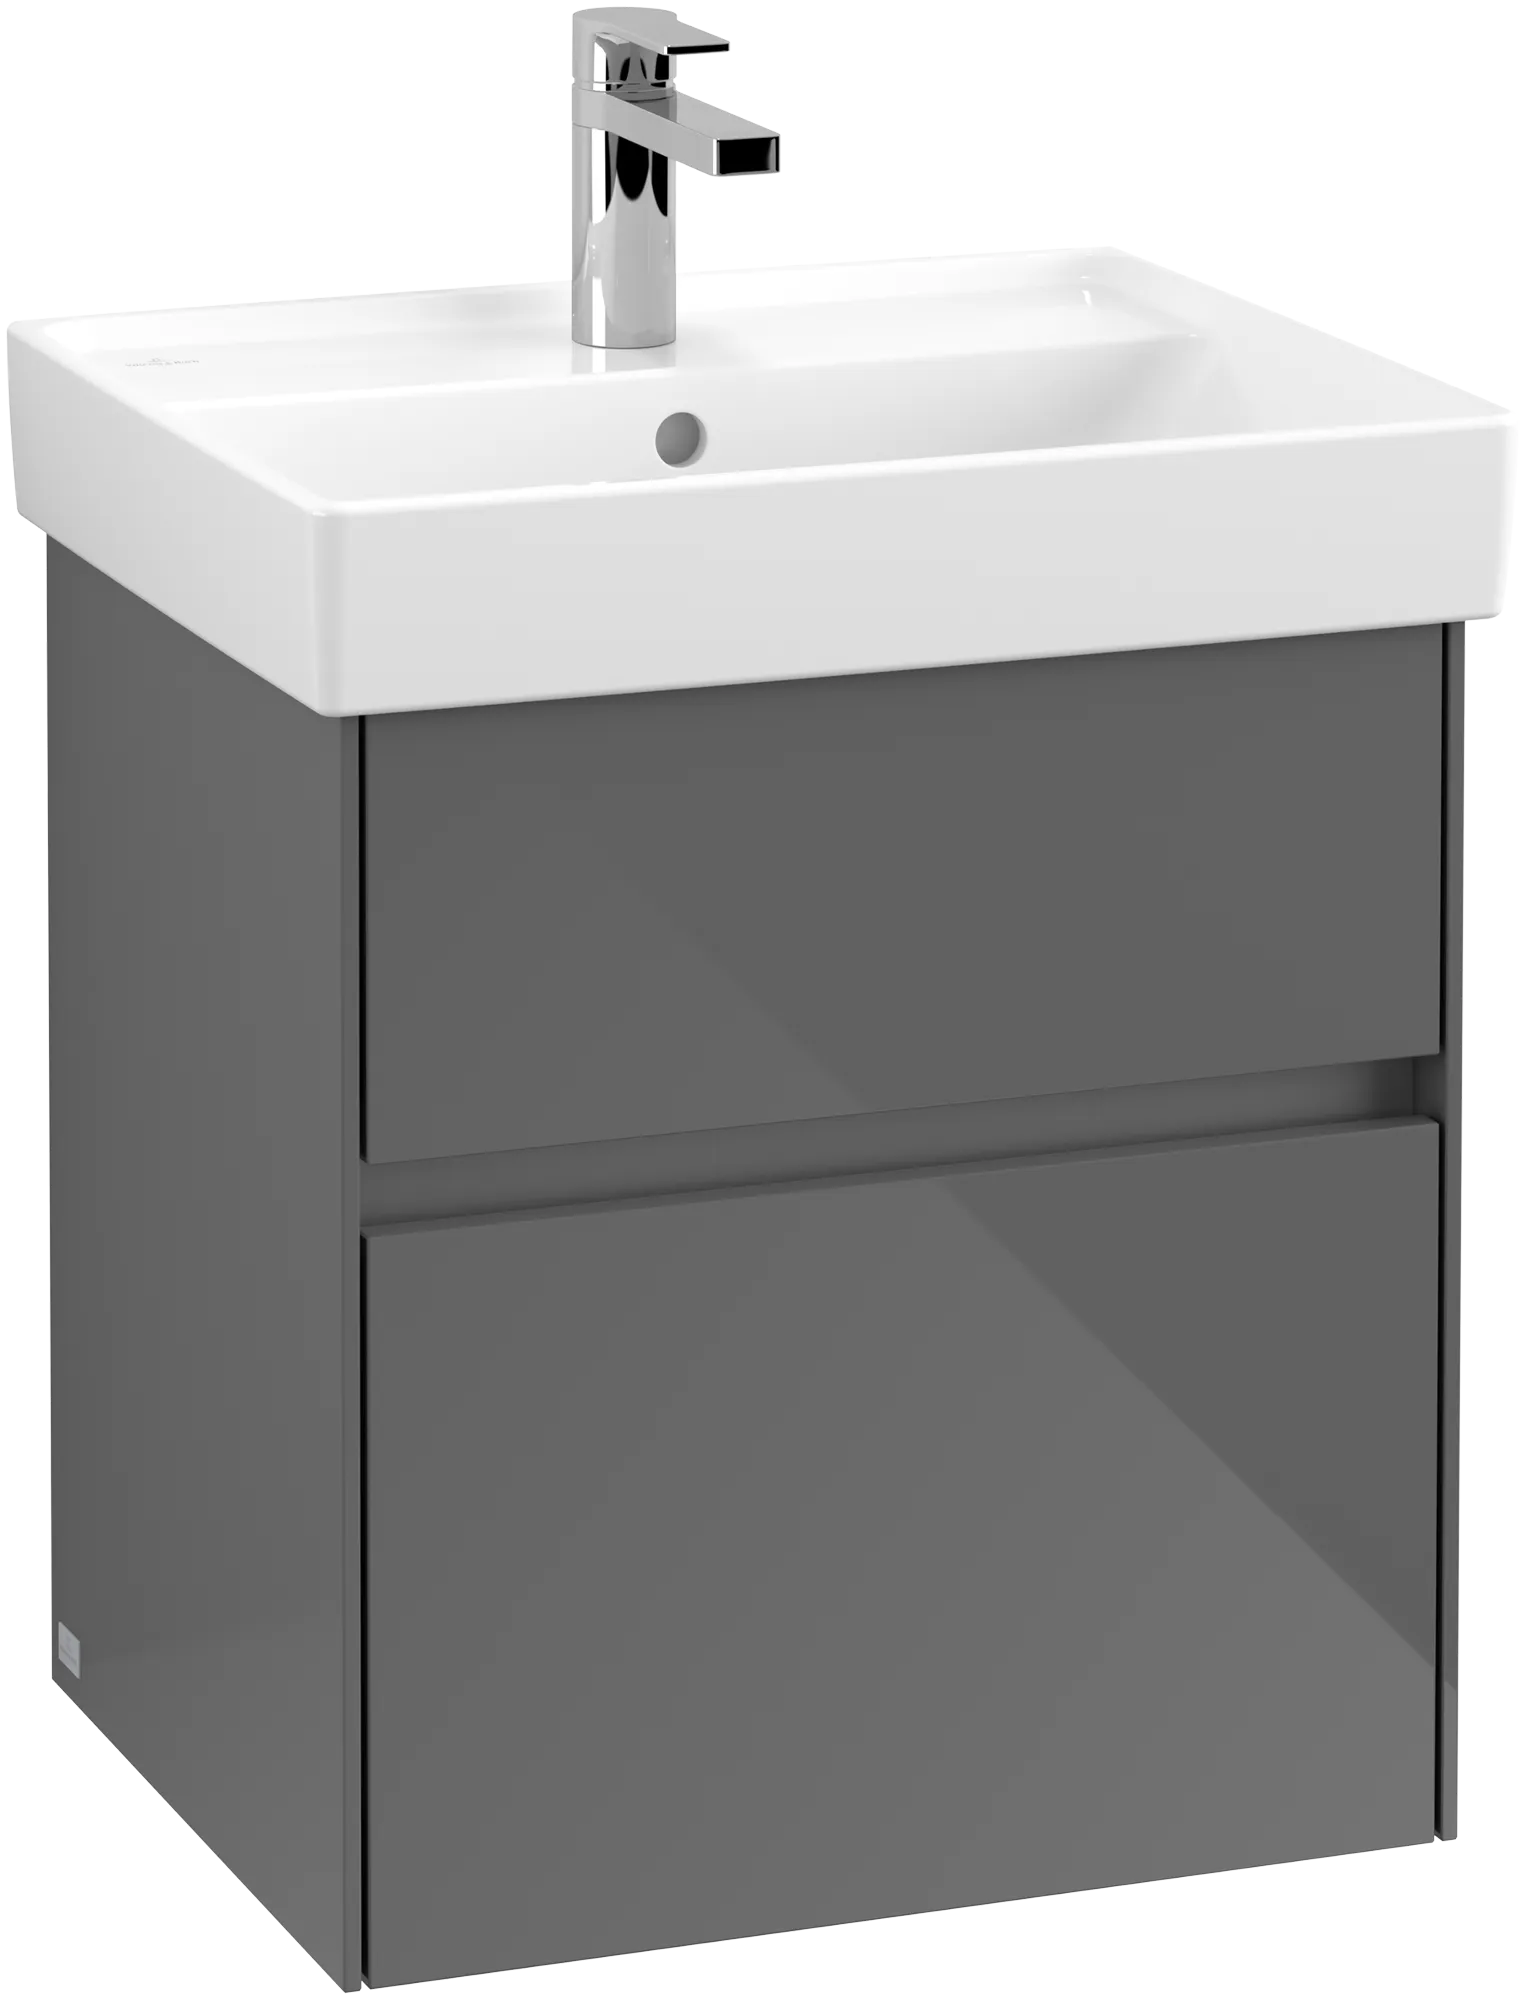 VILLEROY BOCH Collaro Vanity unit, 2 pull-out compartments, 510 x 546 x 414 mm, Glossy Grey #C00700FP resmi